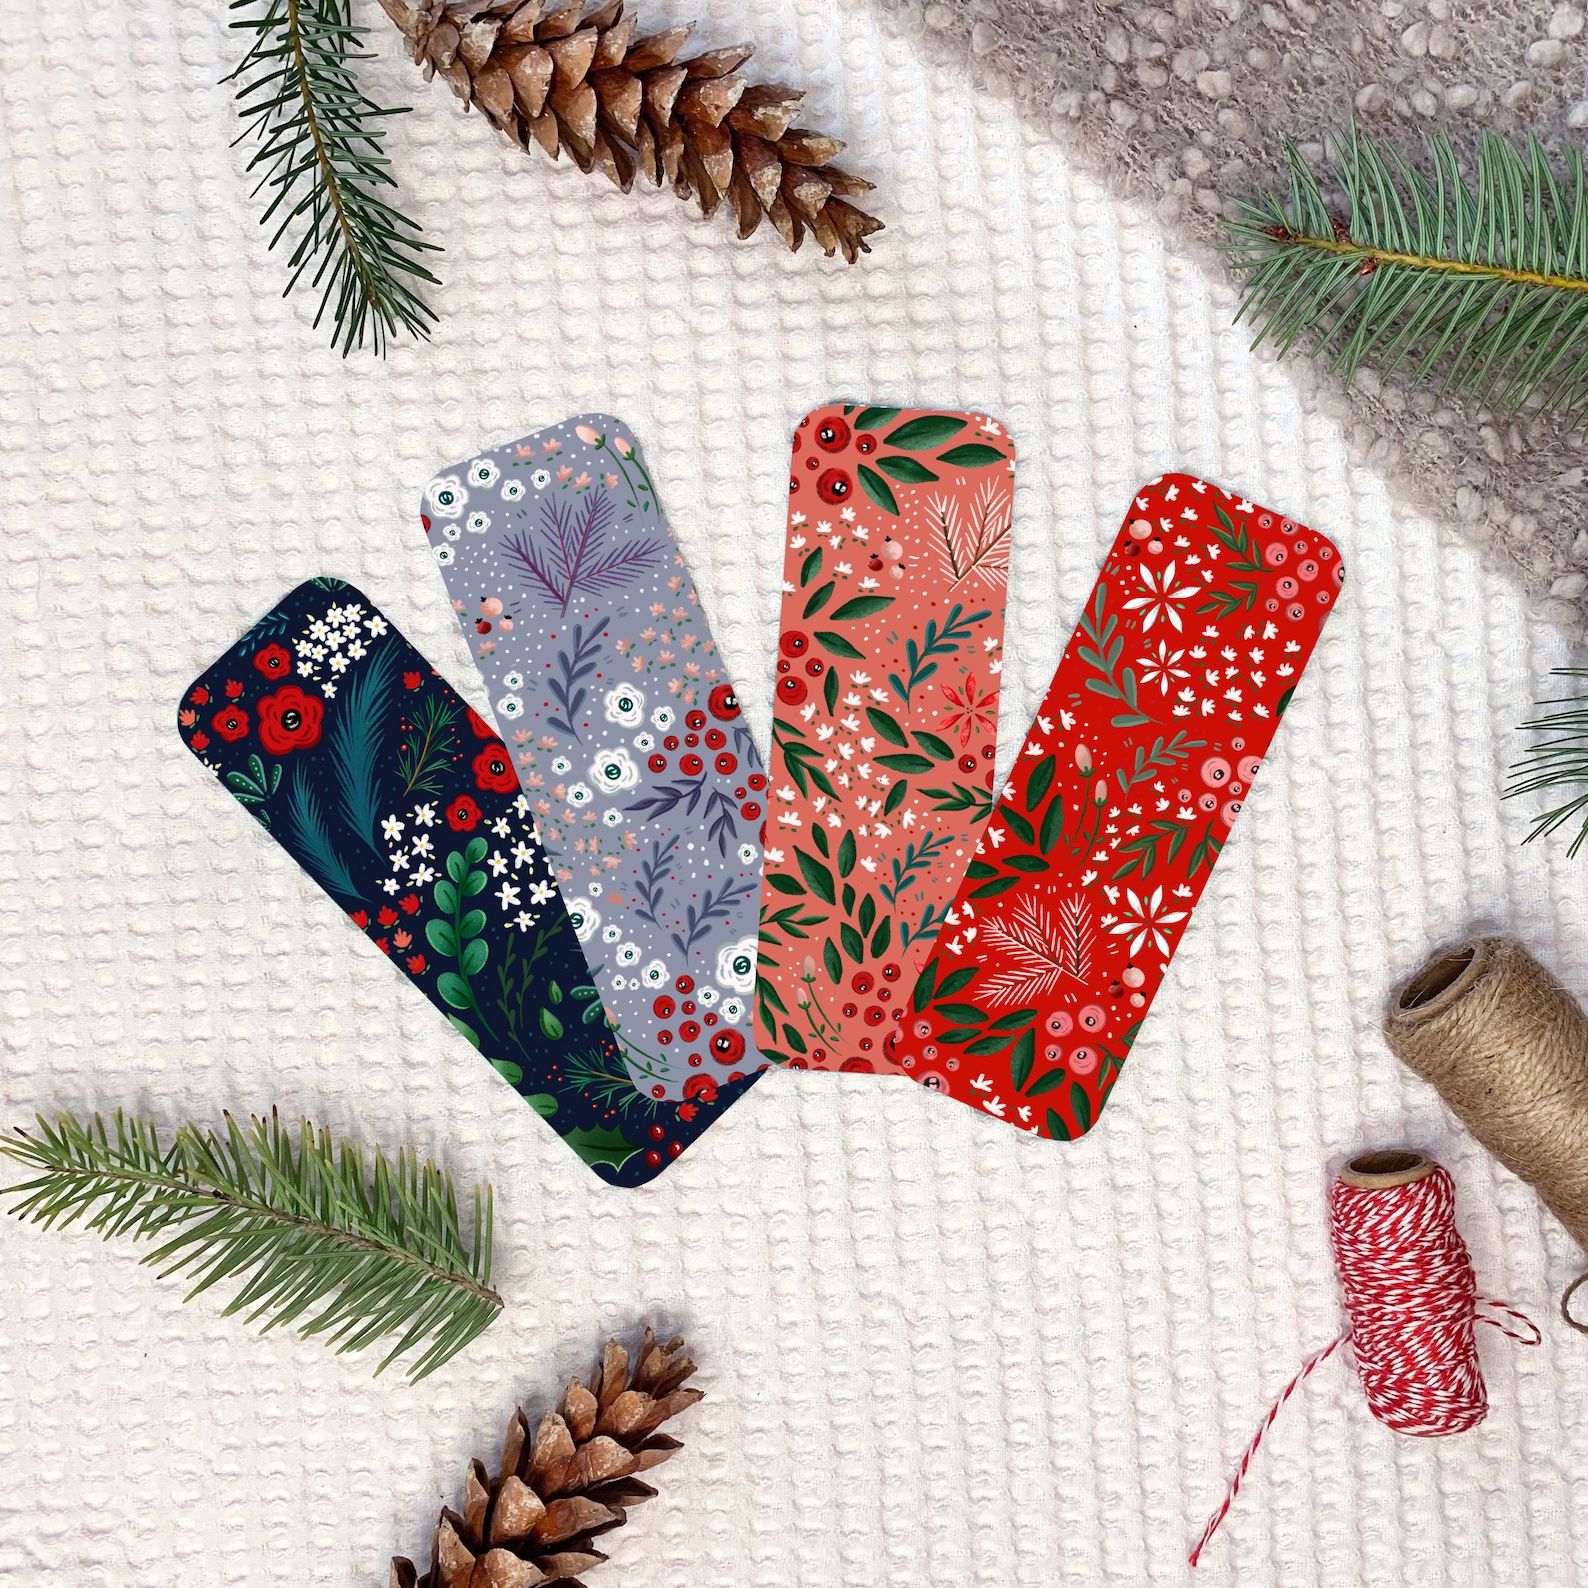 A set of four bookmarks depicting winter florals, berries, and branches